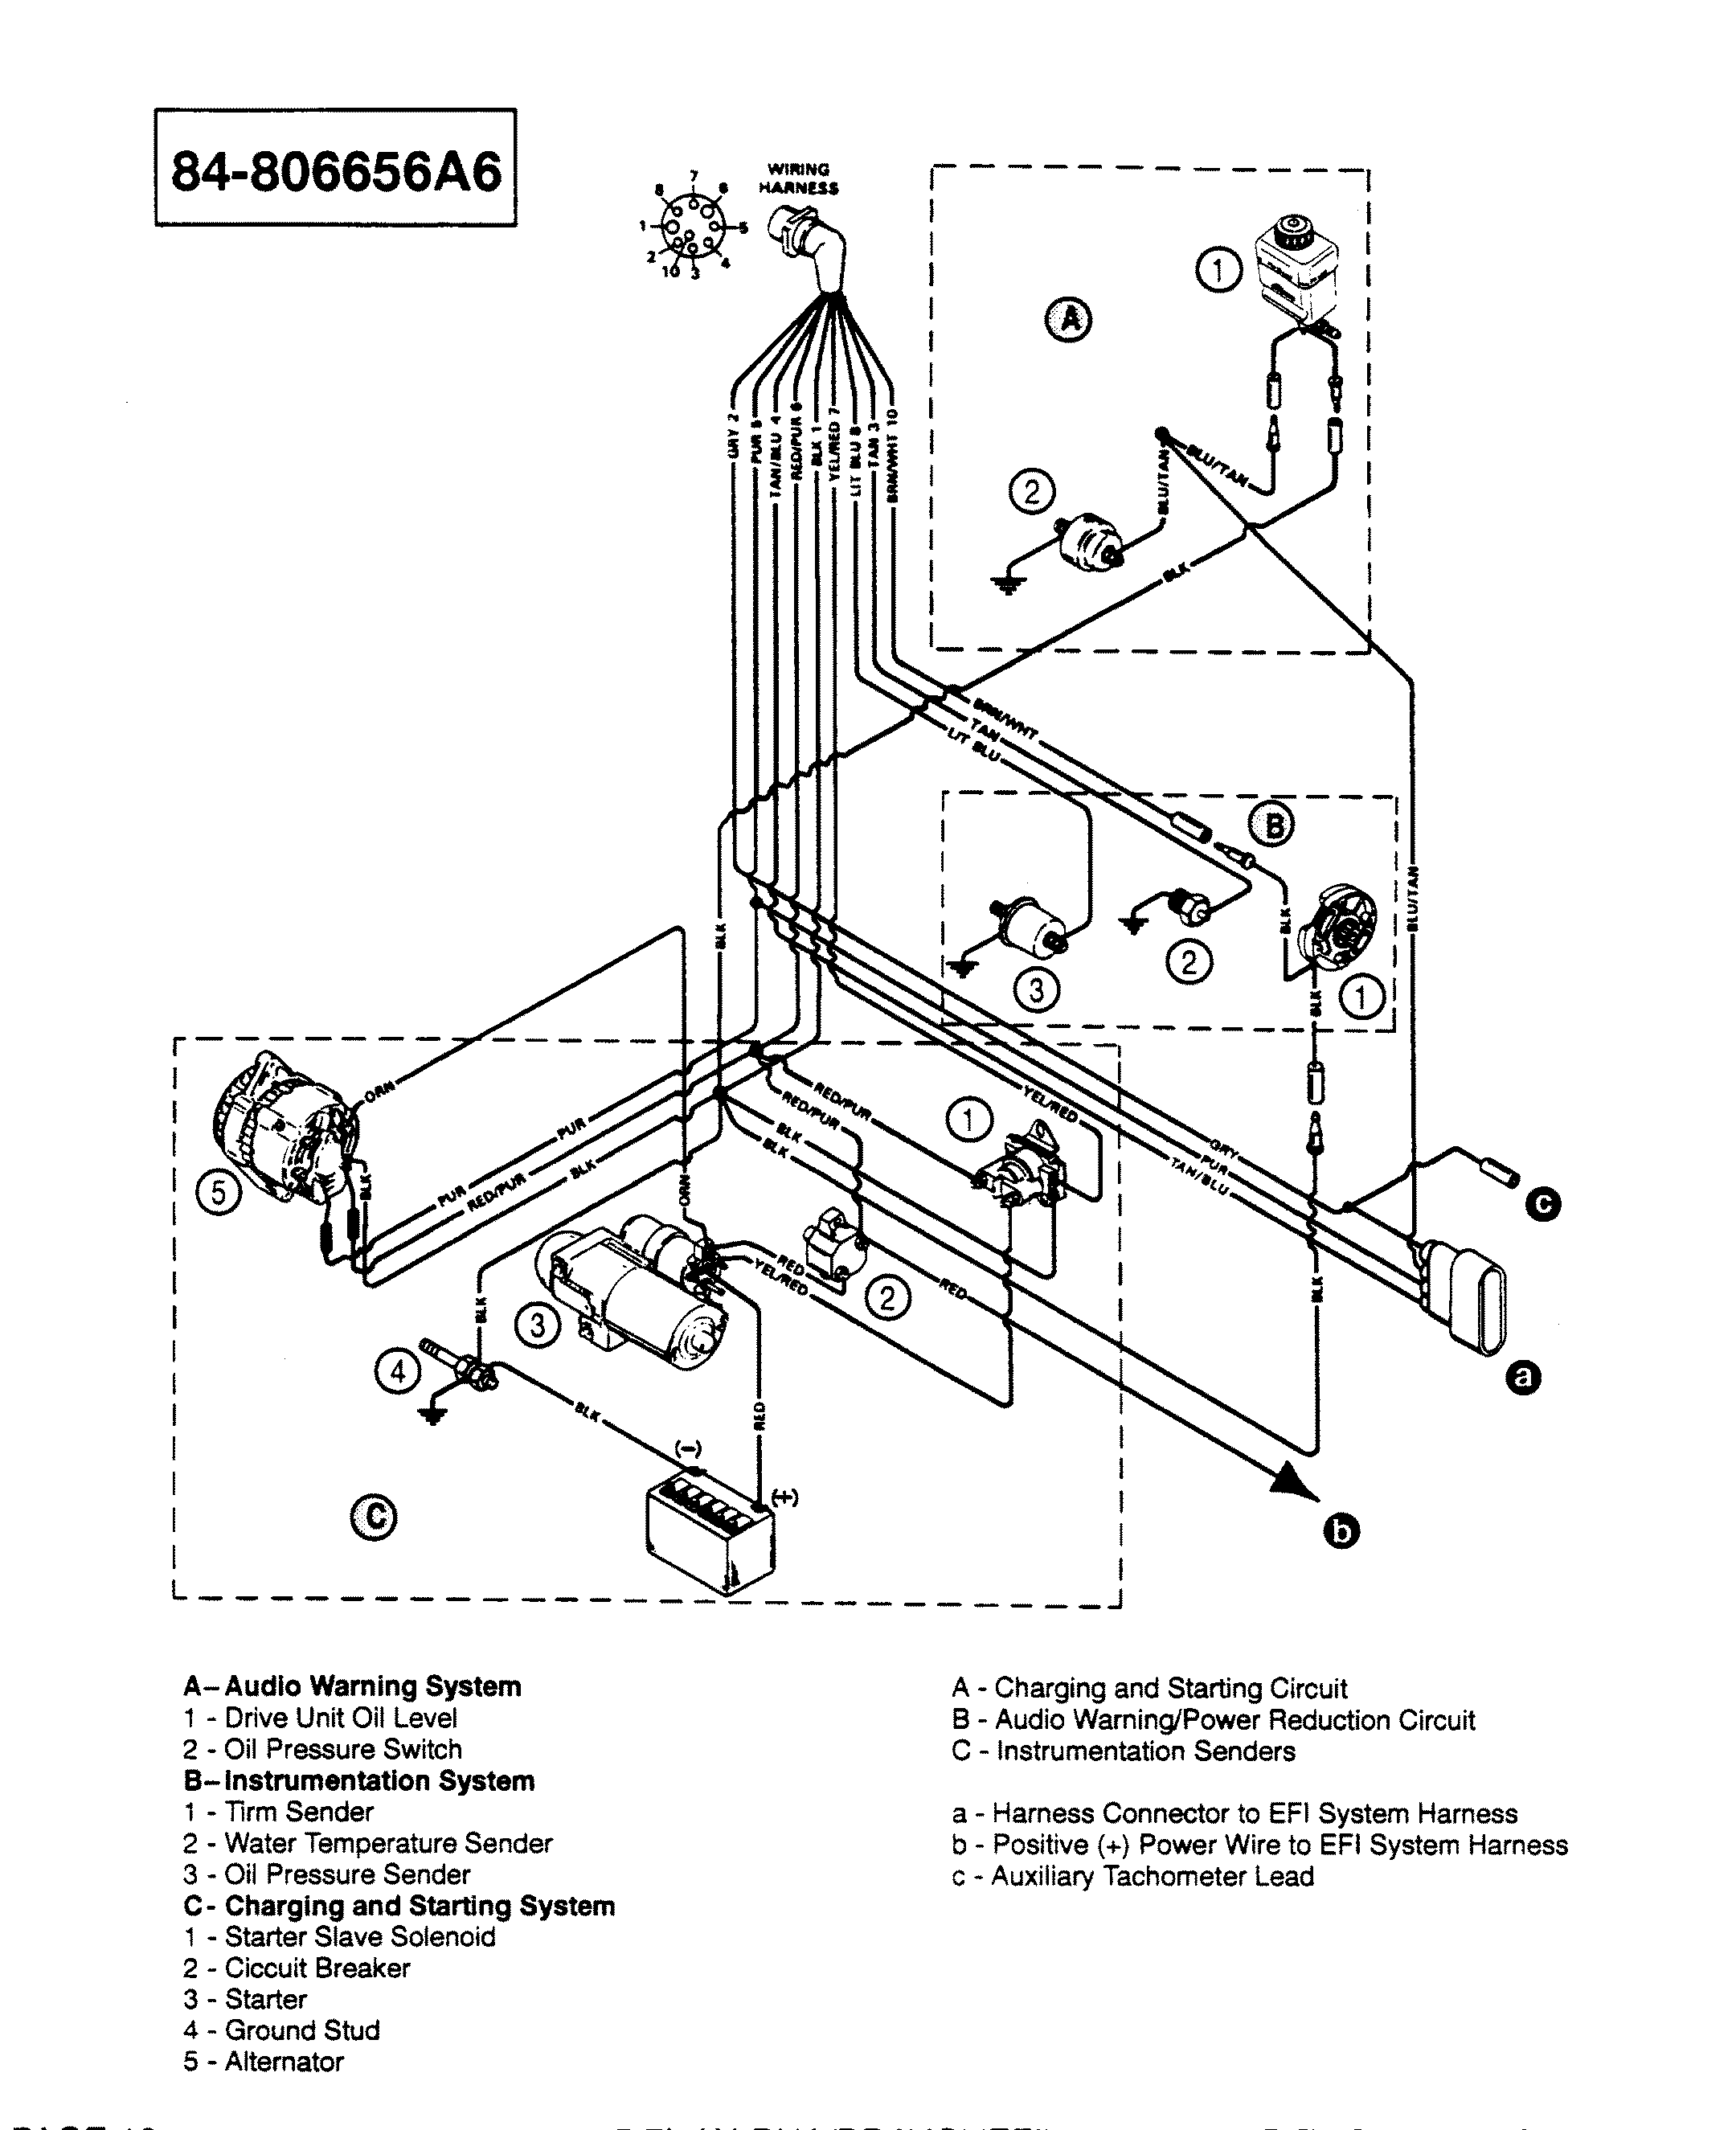 WIRING HARNESS (ENGINIE) (ILLUSTRATION ONLY)